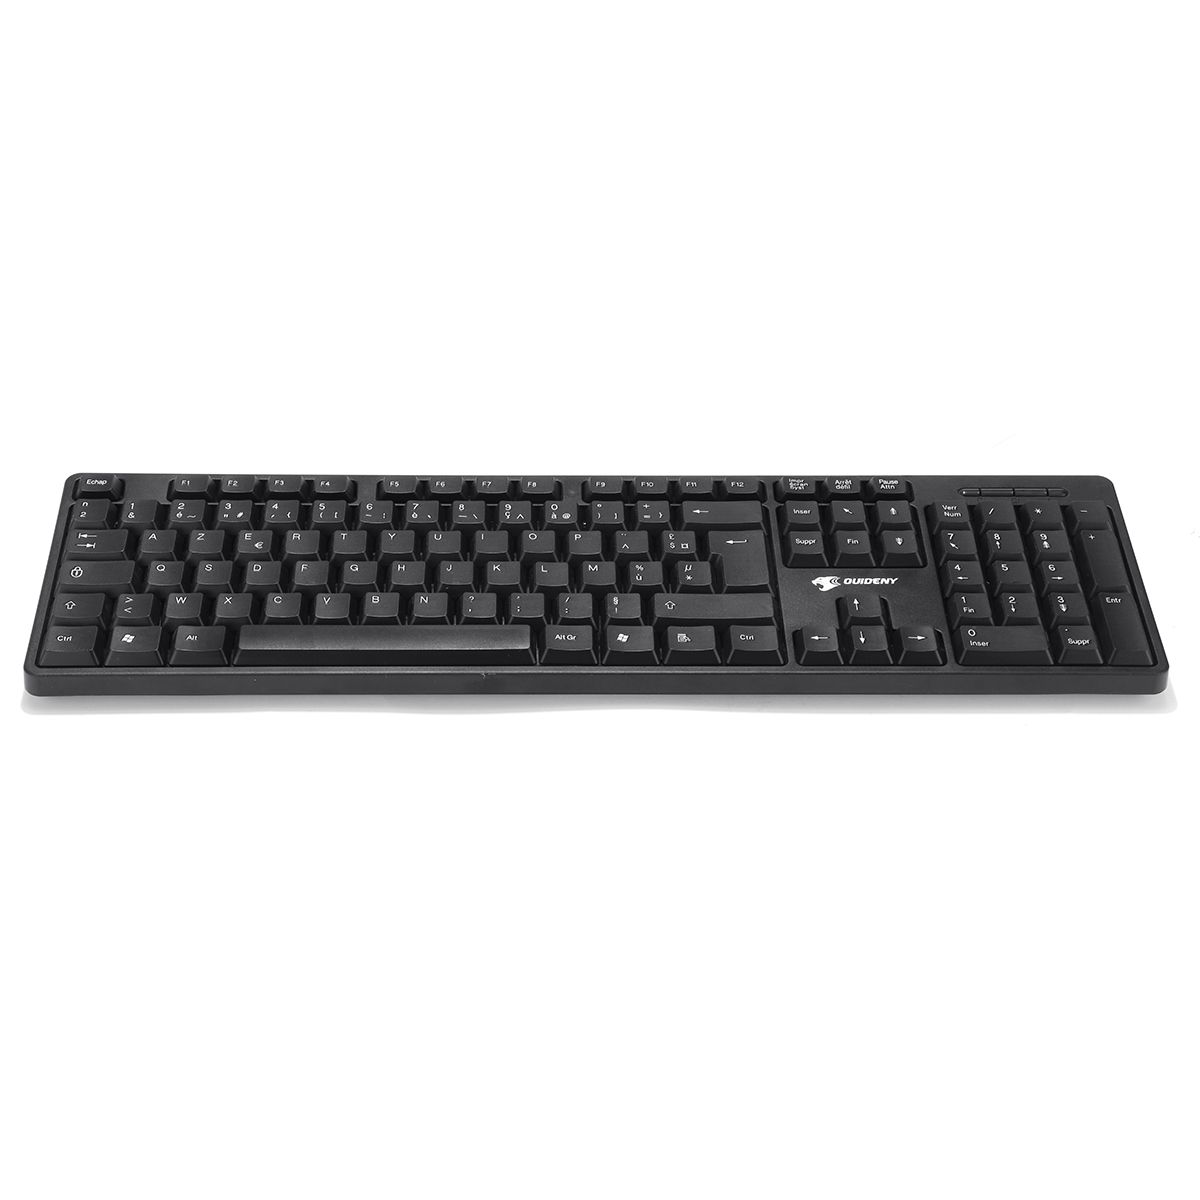 ET-2100-104-Keys-USB-wired-French-Language-Gaming-Keyboard-for-Desktop-and-Laptop-1531421